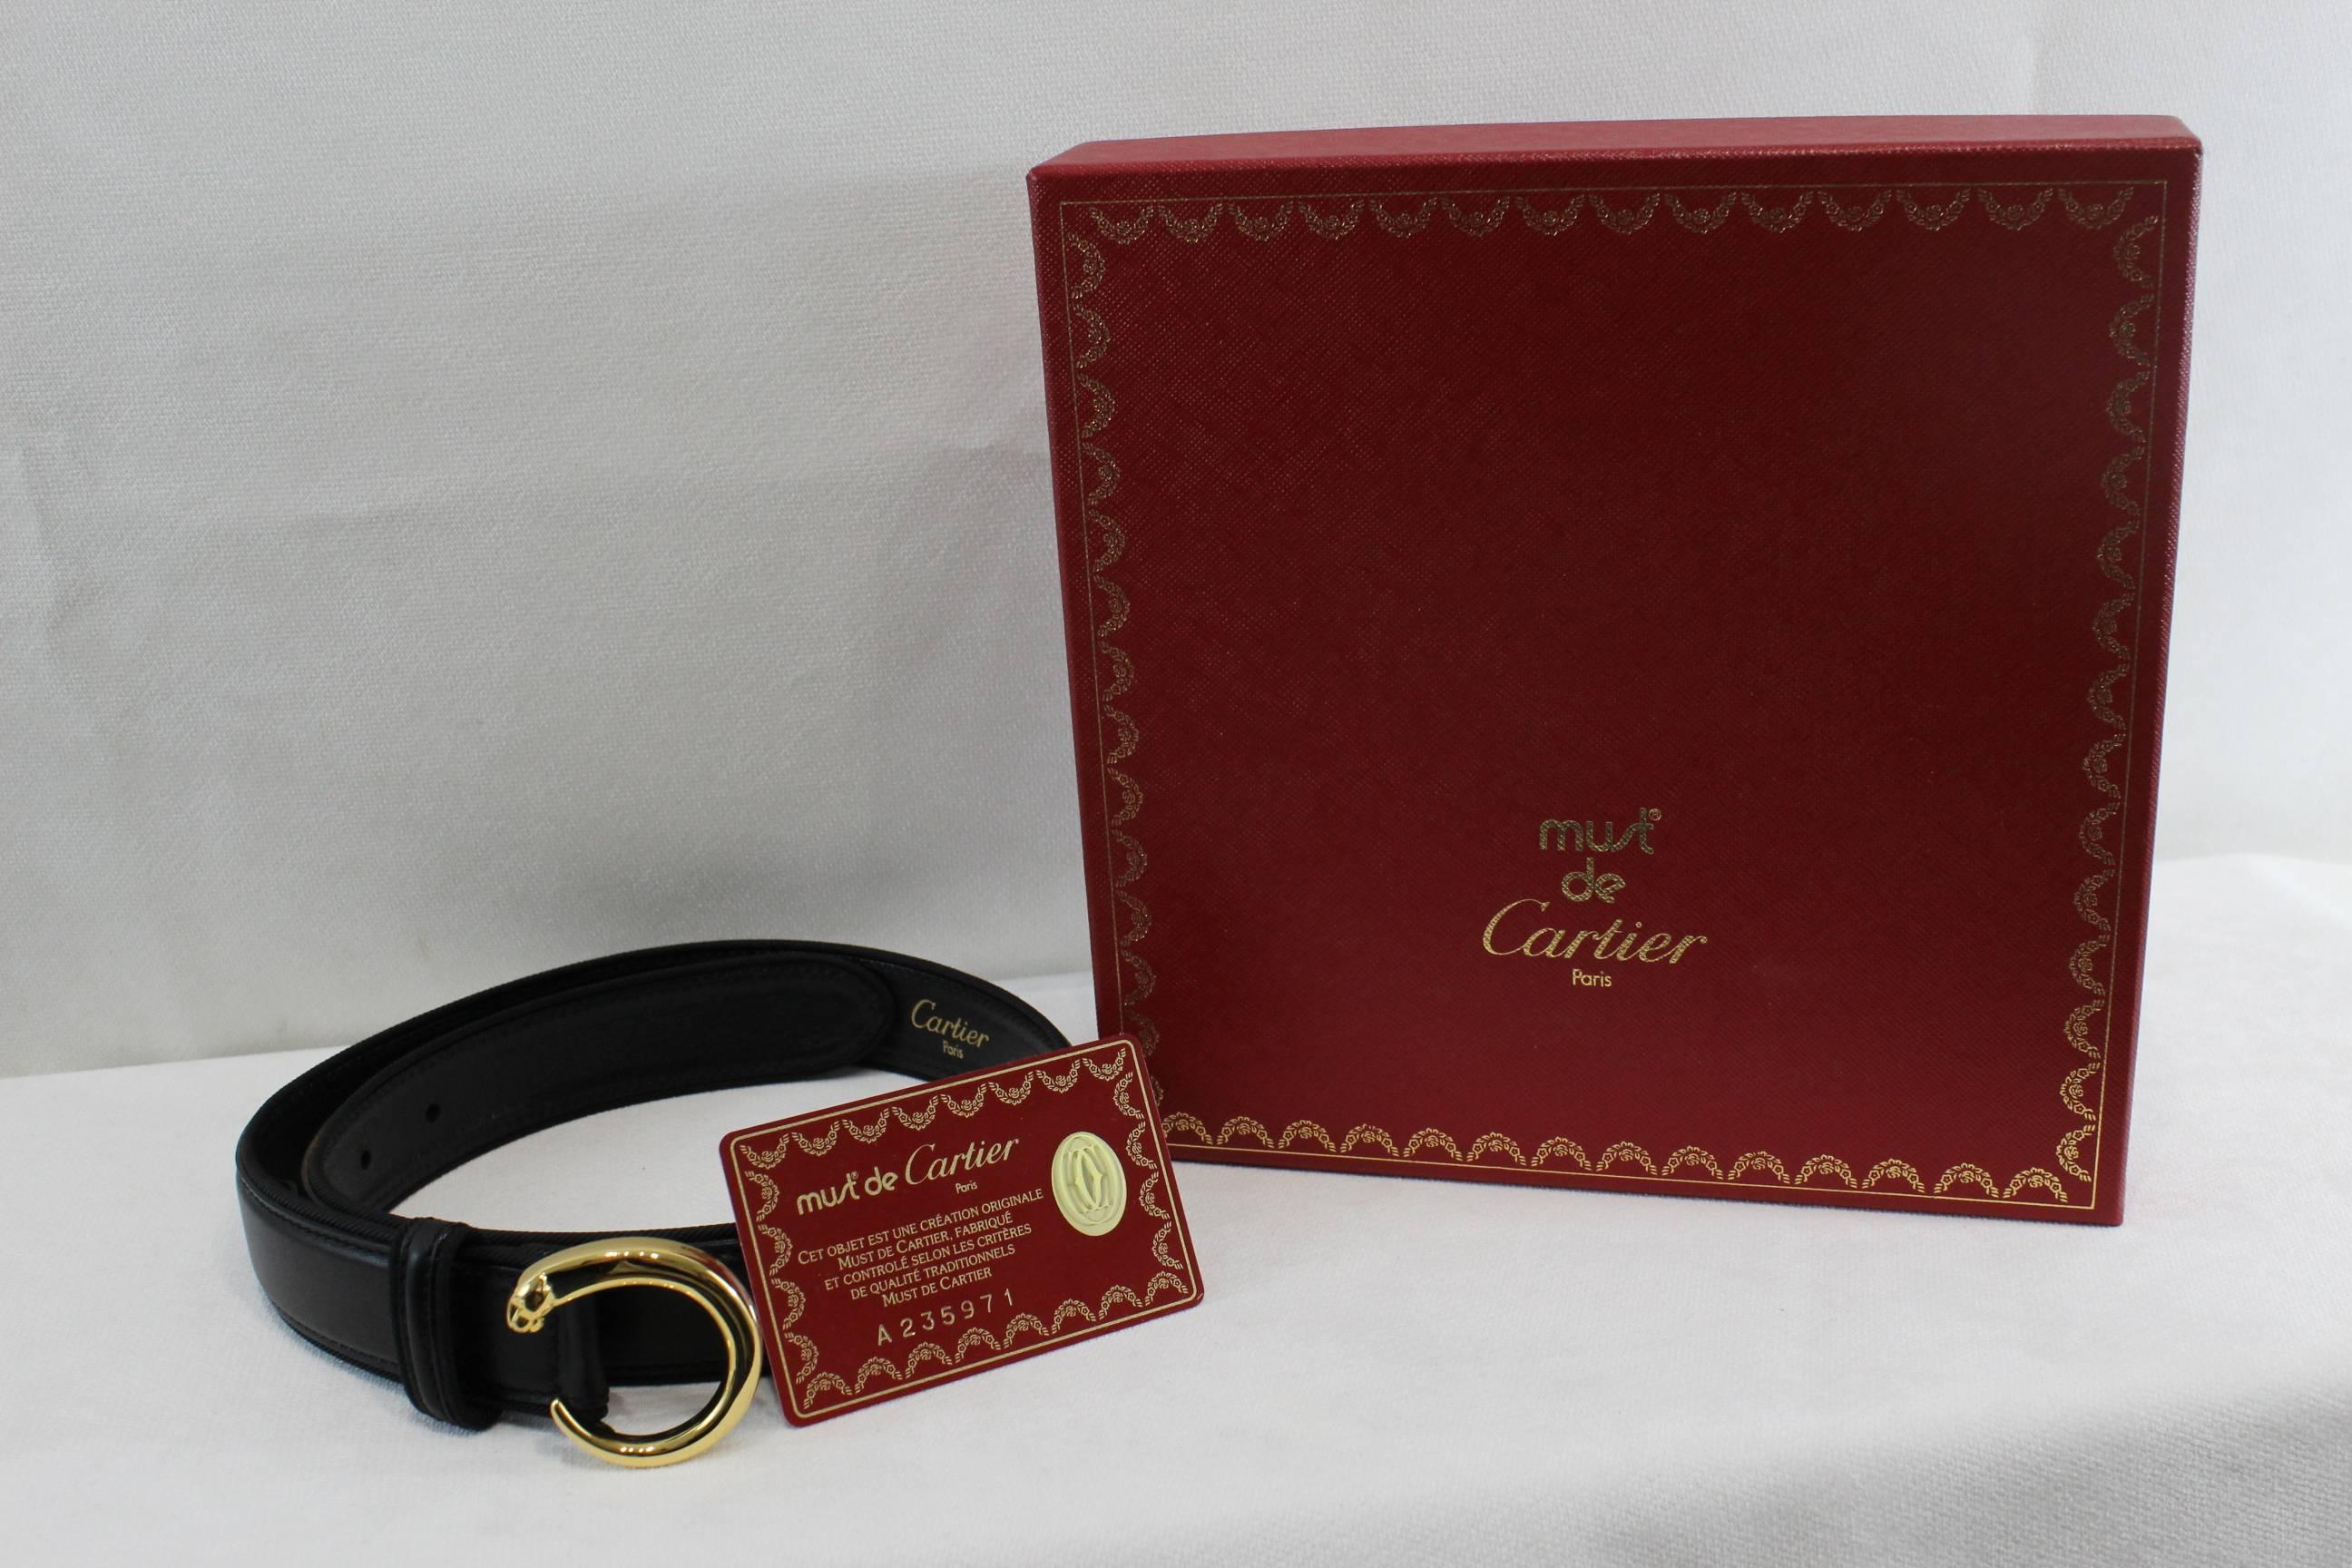 Really ncie Vintage Cartier Belt with Panthere Buckle.

Never used

Coming with box and card

Size S: maximum lenght 30"